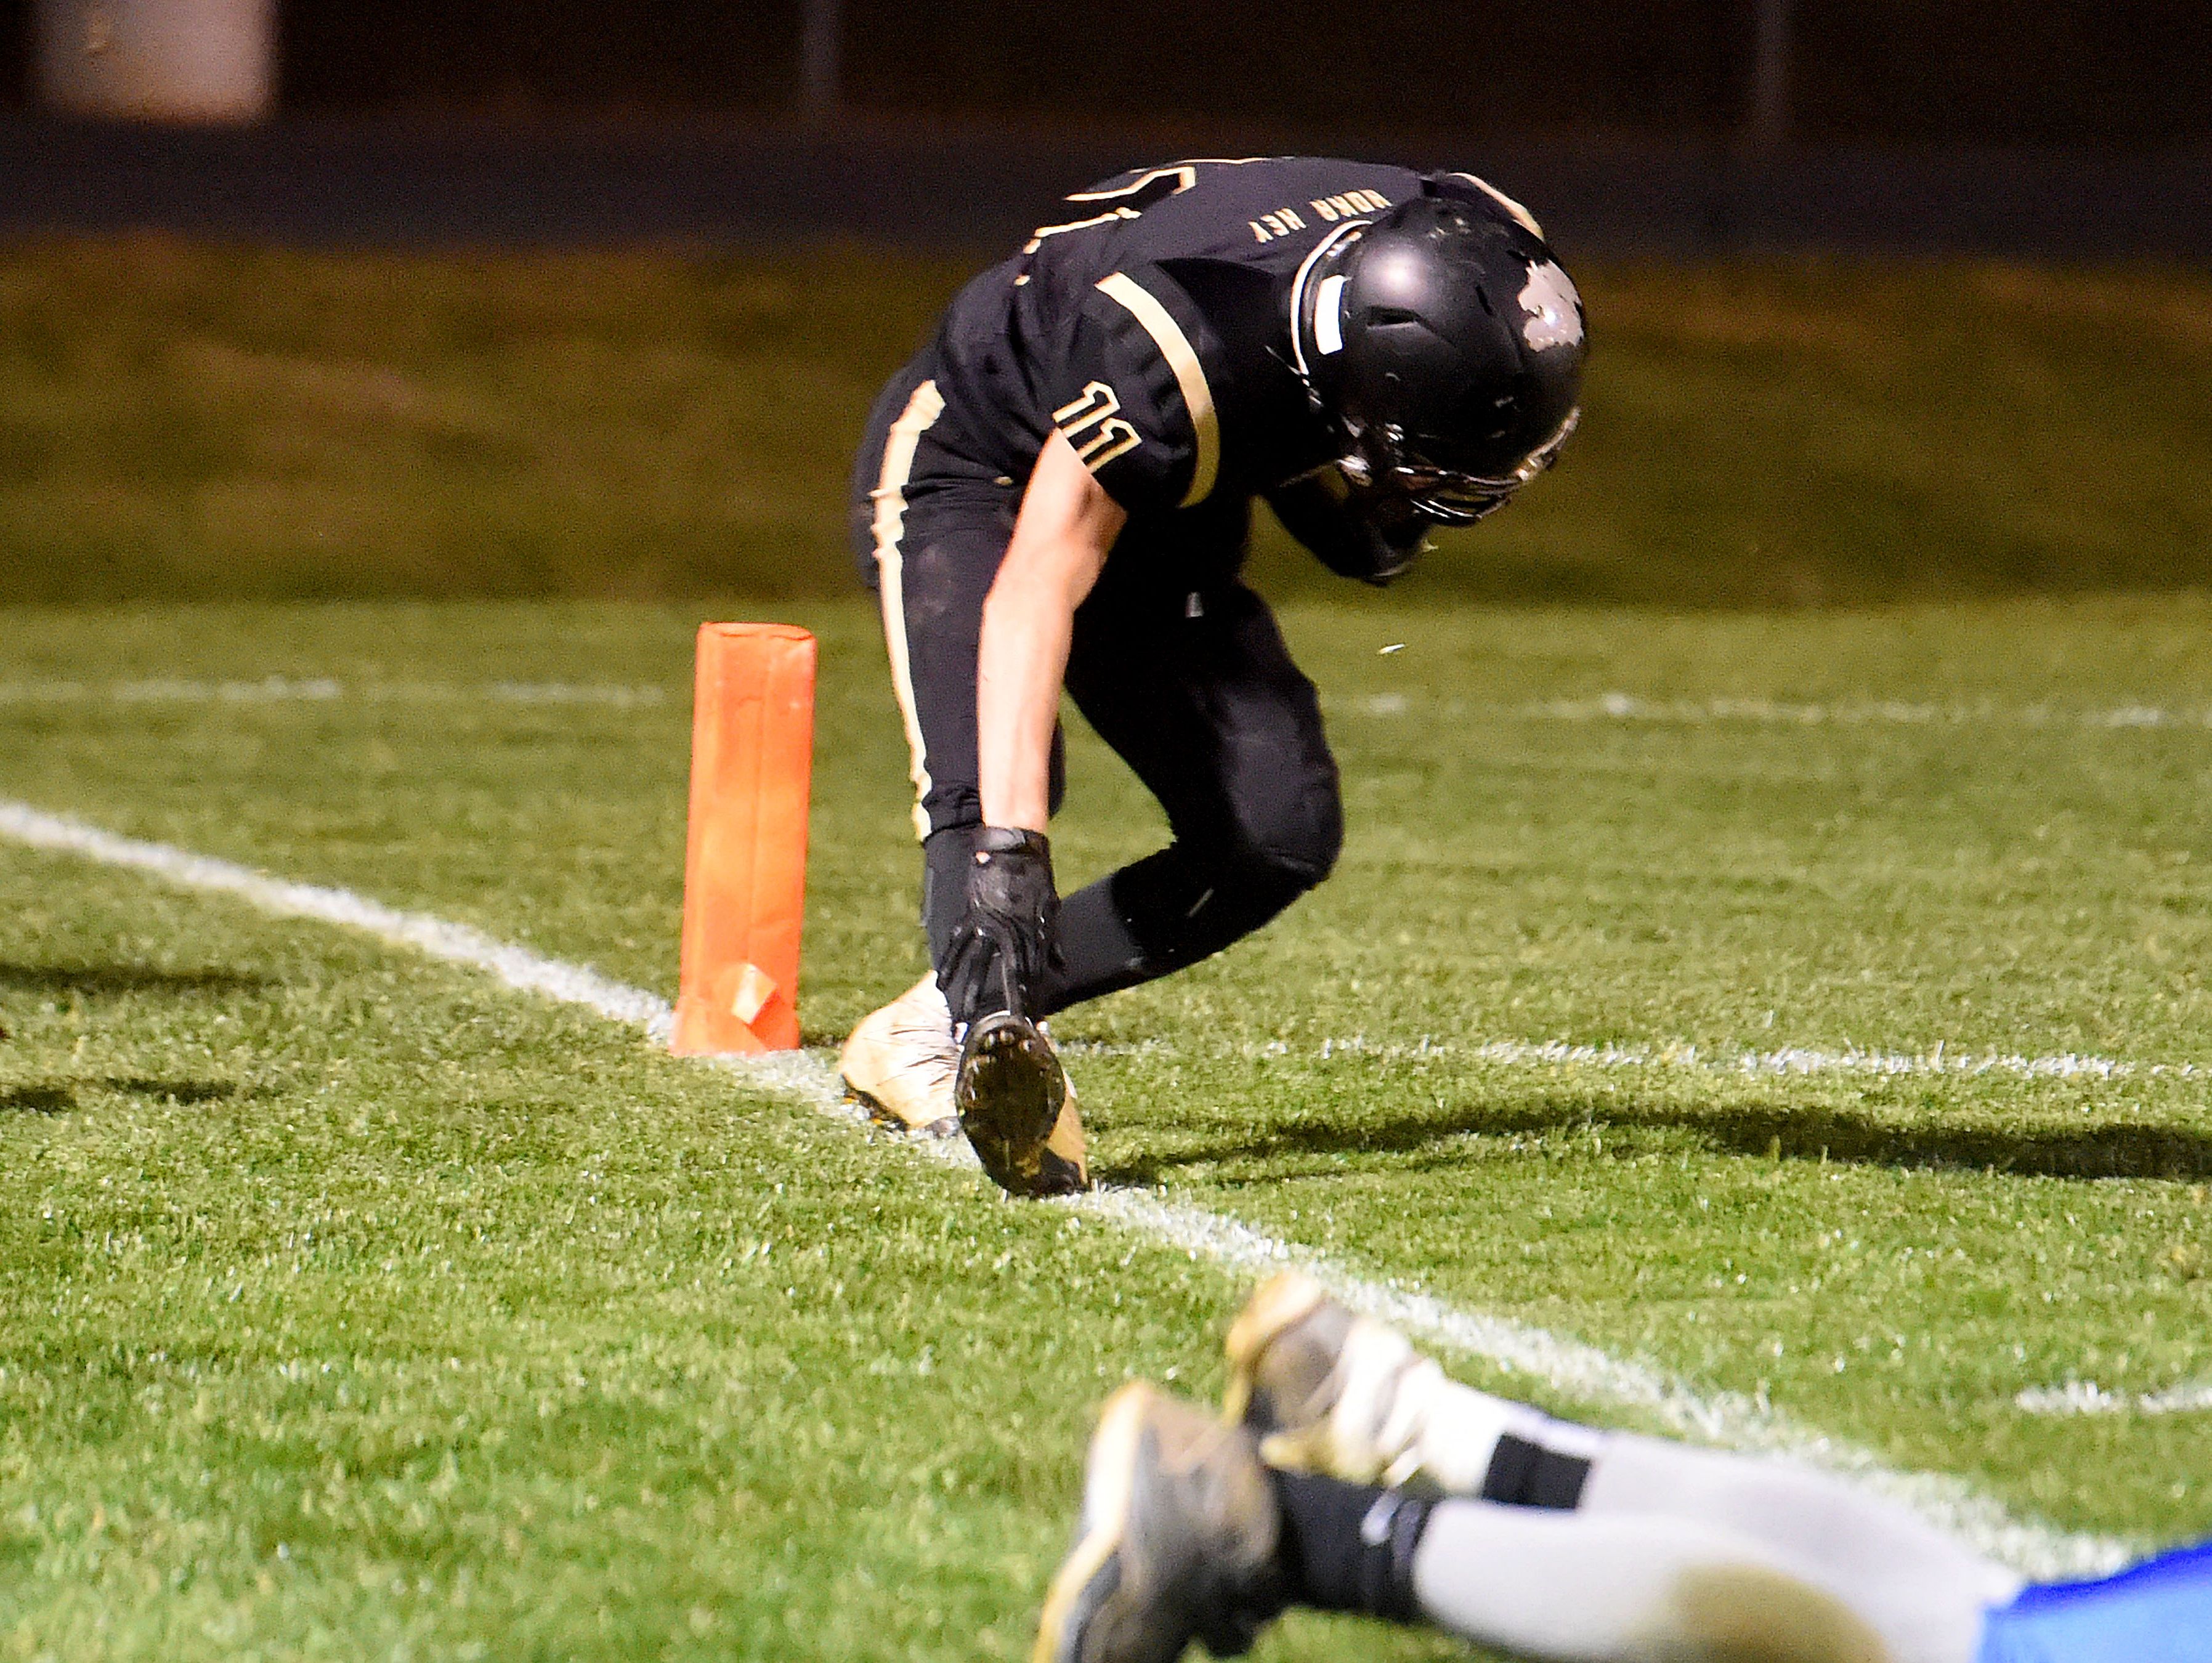 Buffalo Gap's Josh Reed spins around trying to stay in bounds but his foot just slips over the line one yard short of the goal line during a football game played in Swoope on Oct. 27, 2016.